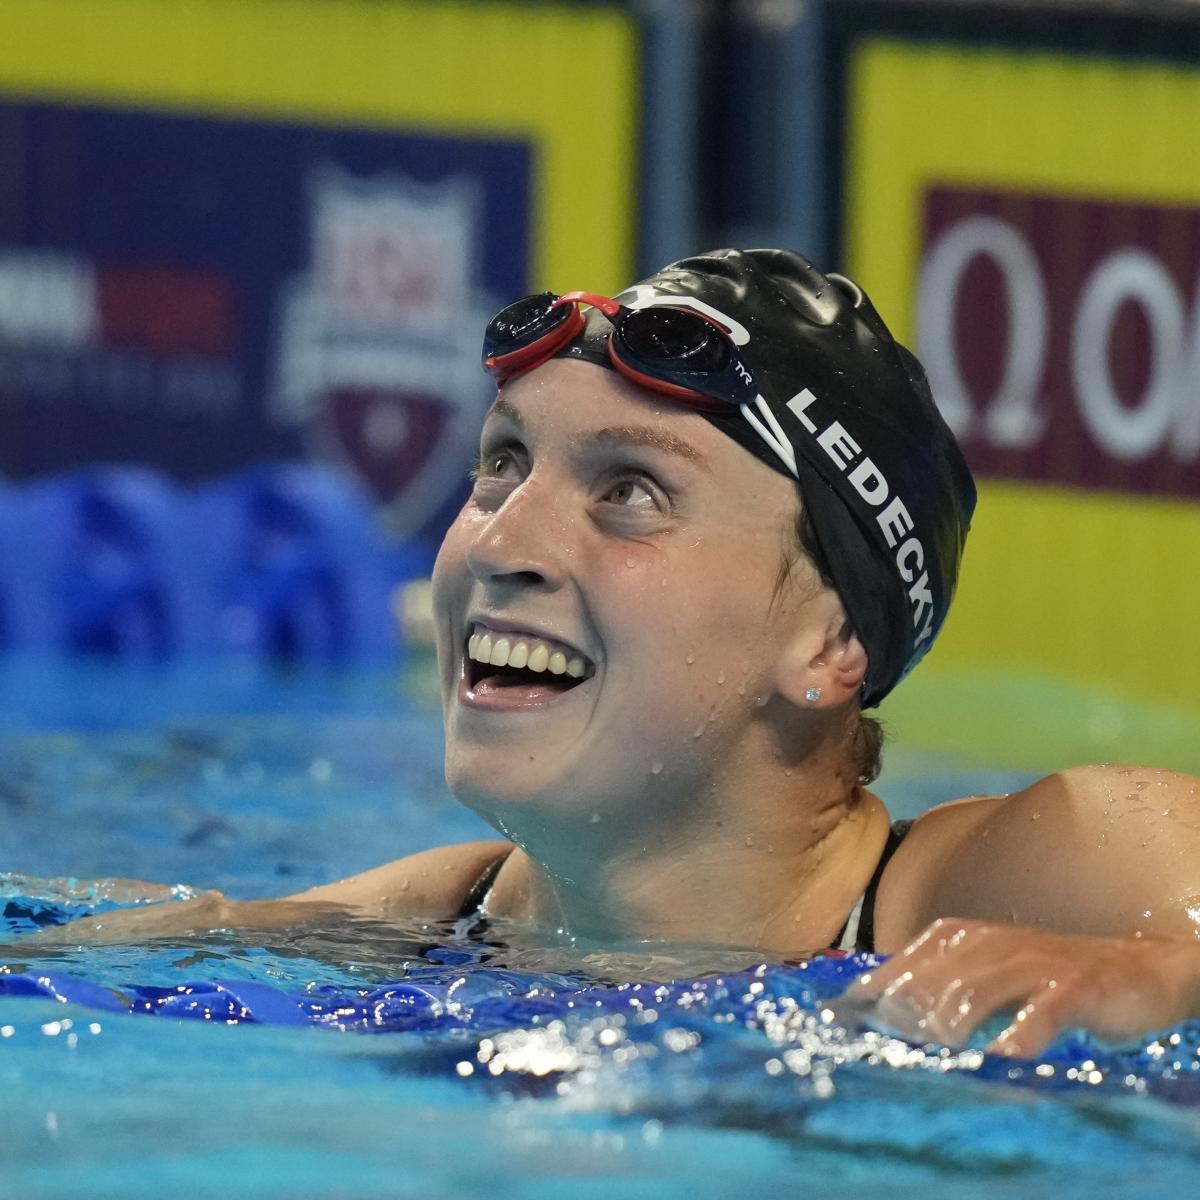 Katie Ledecky Wins Silver Medal During Women's 400M Freestyle at 2021